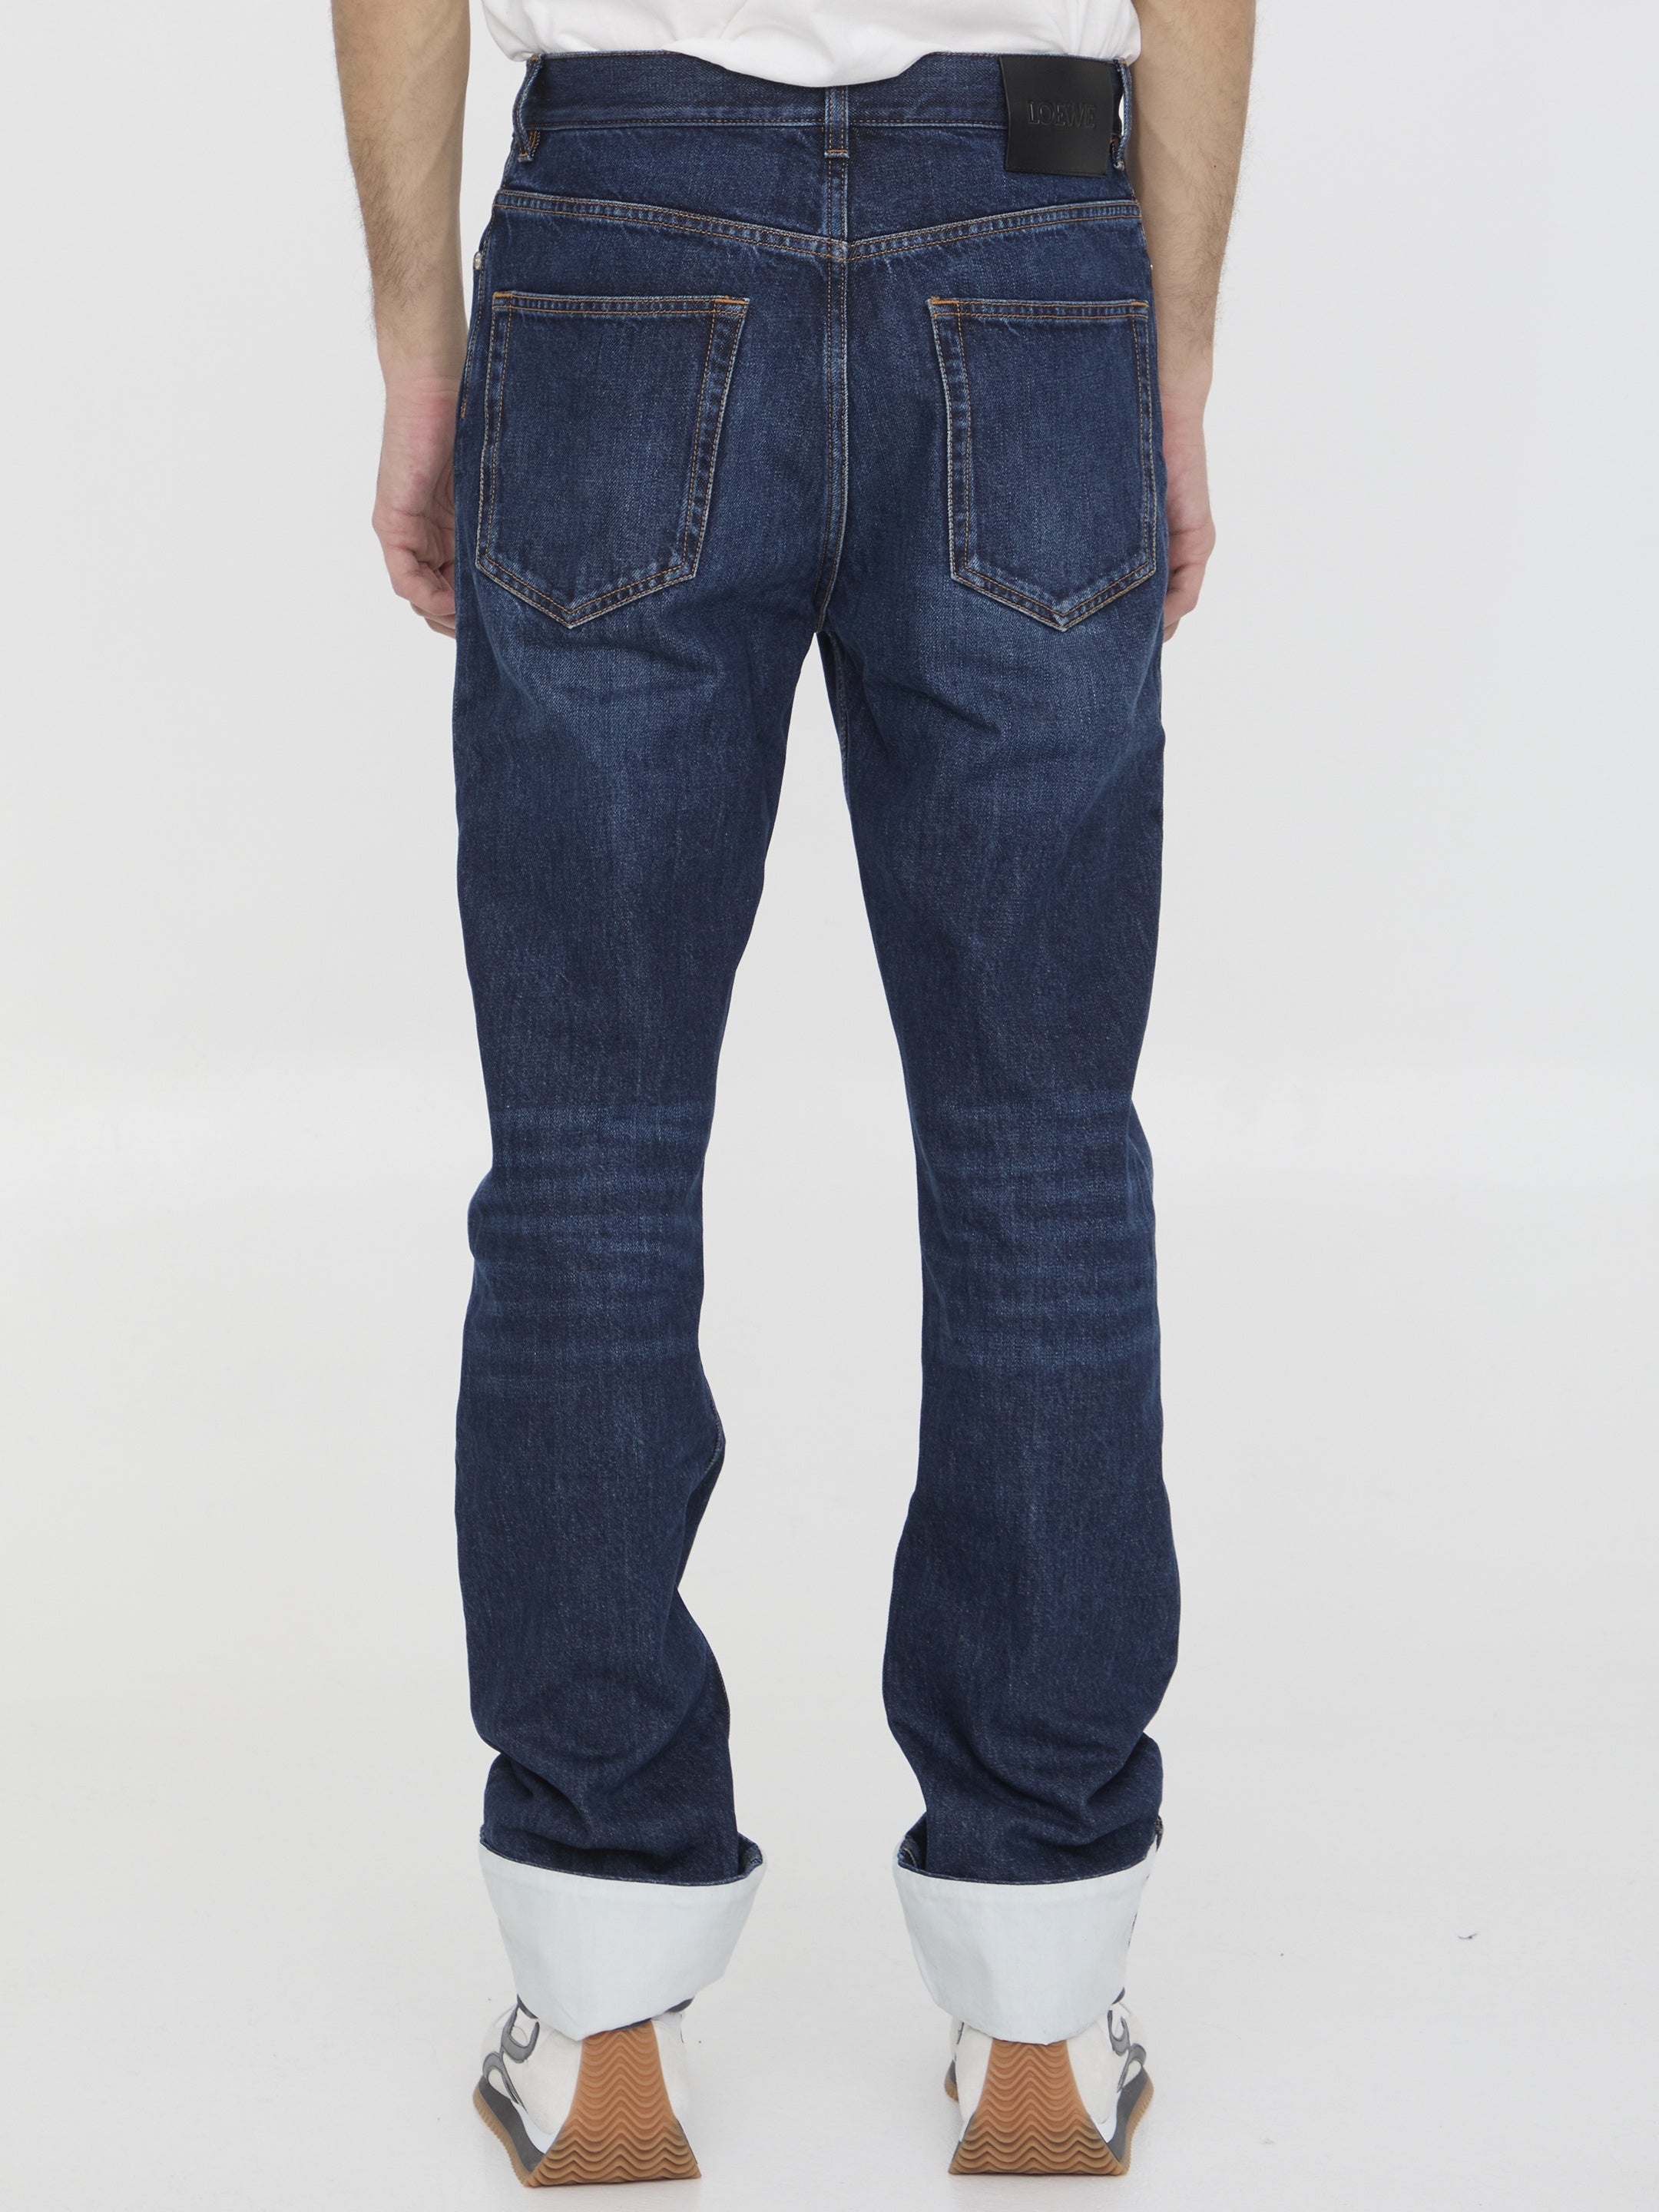 LOEWE-OUTLET-SALE-Fisherman-turn-up-jeans-Jeans-ARCHIVE-COLLECTION-4.jpg